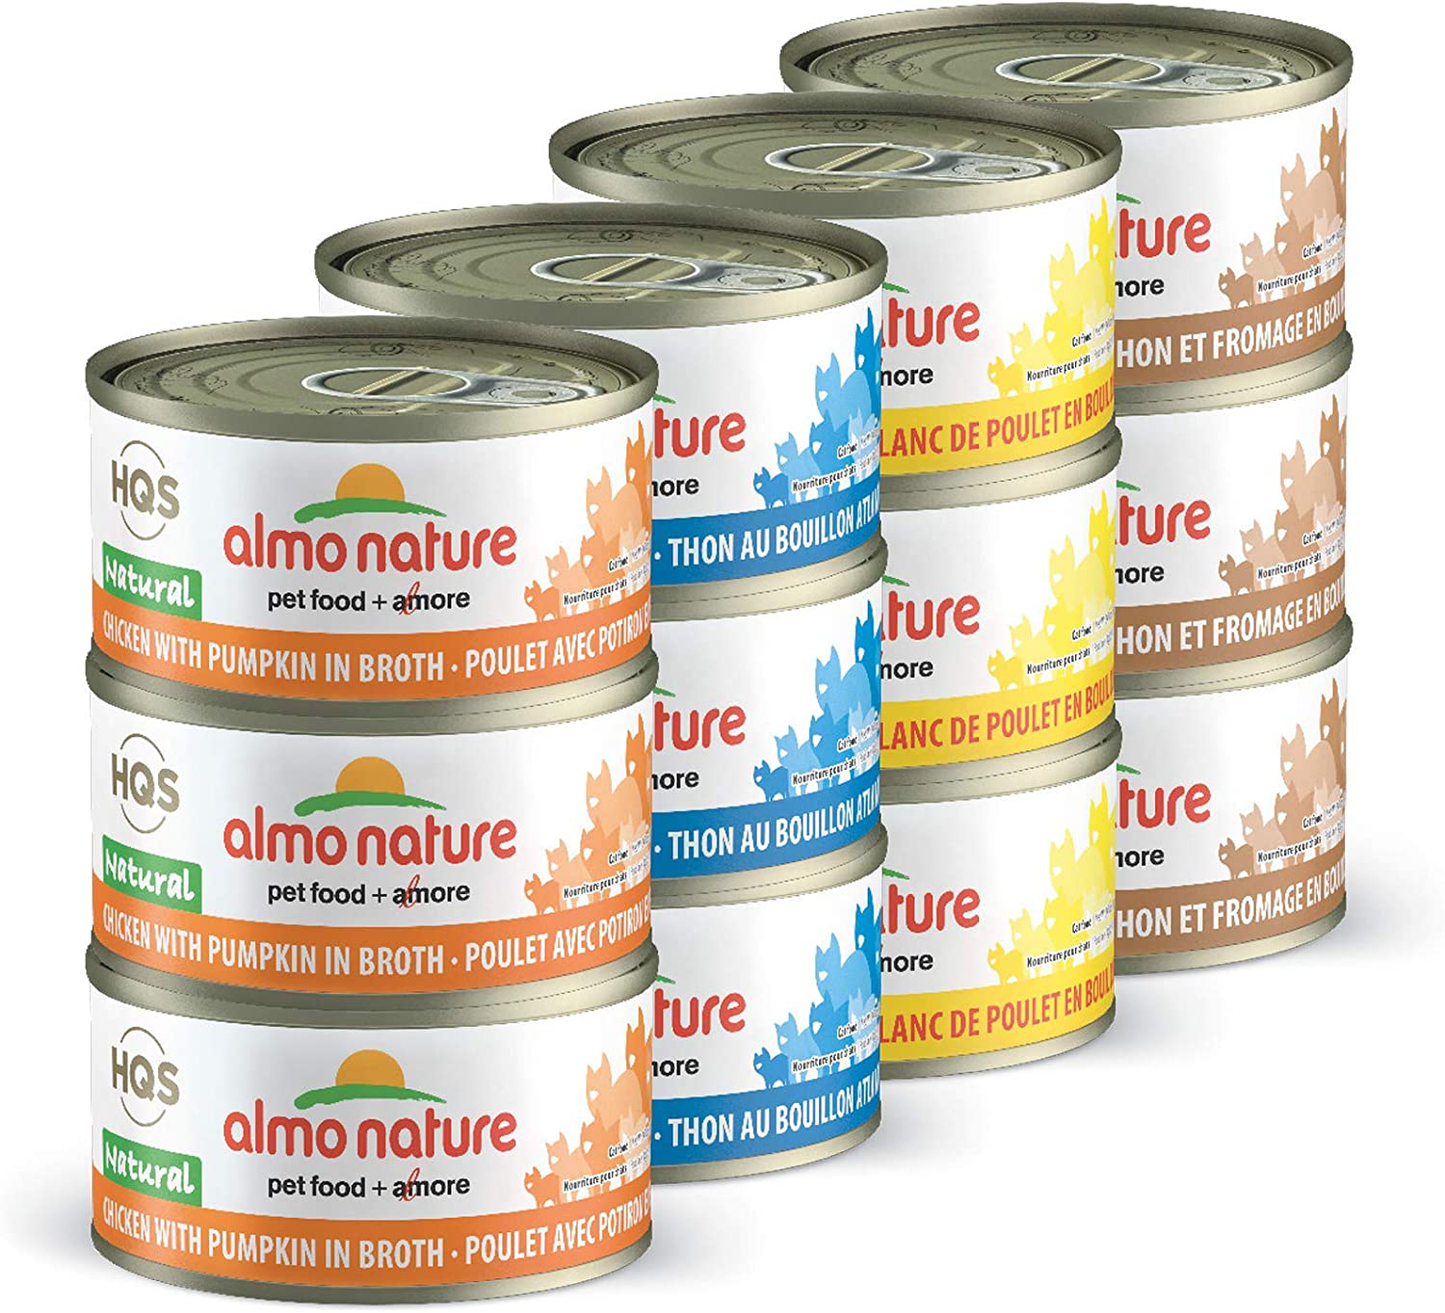 Almo Nature HQS Natural Variety Pack Grain Free, Additive Free Recipes - Chicken with Pumpkin (6); Chicken Breast (6); Tuna Atlantic Style (6); Chicken & Cheese(6), Adult Cat Canned Wet Food, Shredded